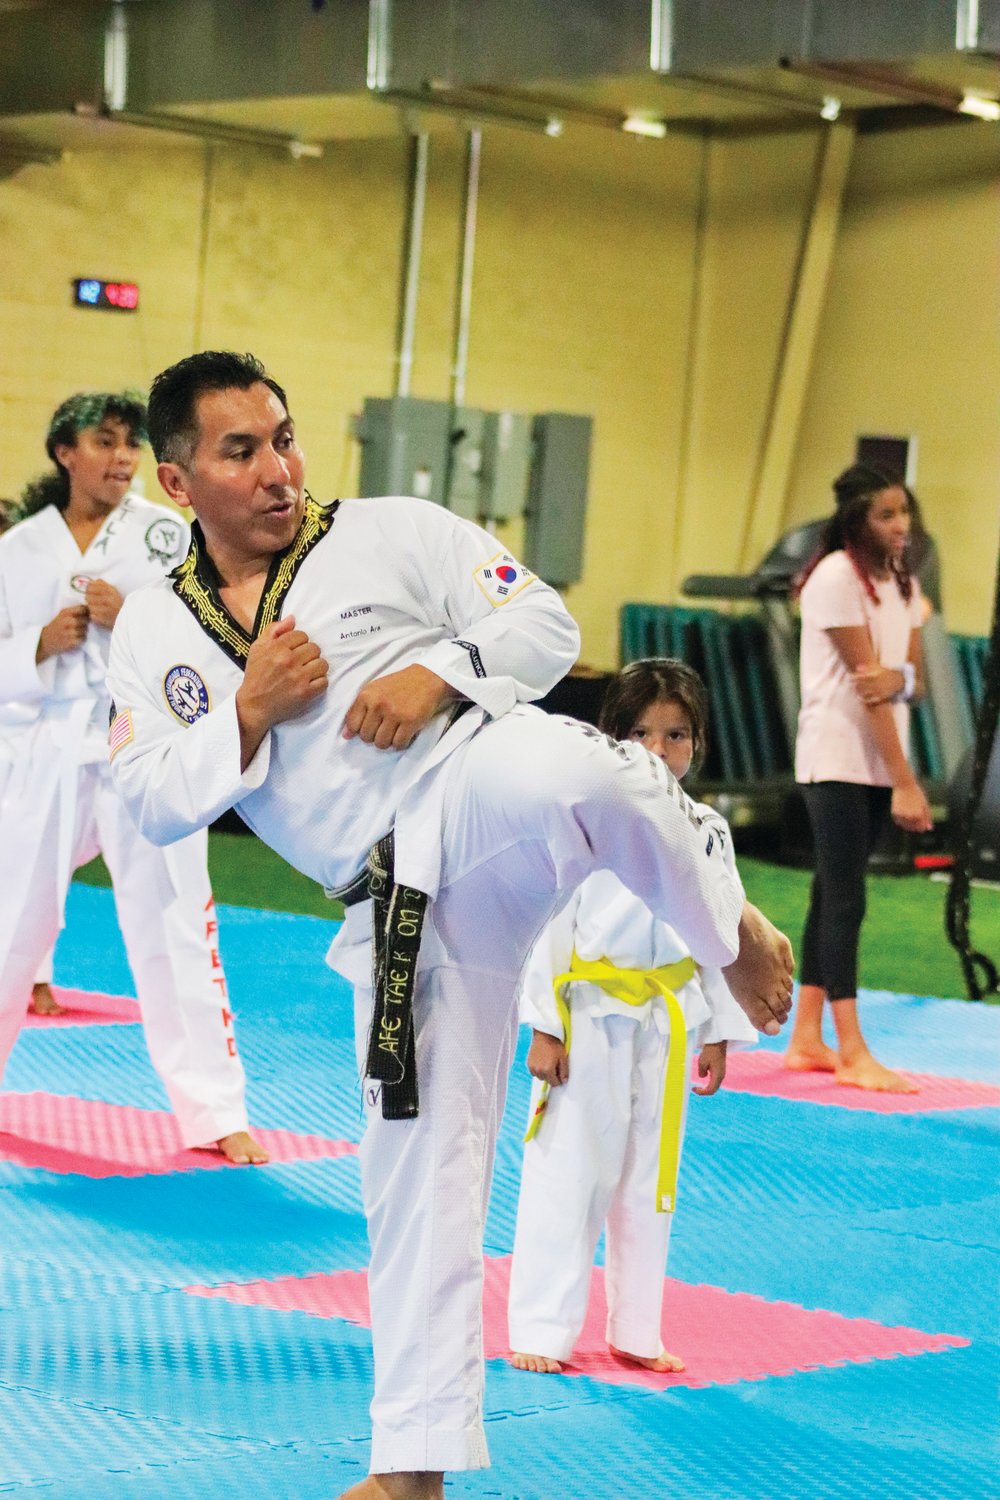 A.F.E. Taekwondo Fitness Academy owner, founder and master instructor Antonio Ara (front) practices his kicking form during the beginner's class on Monday. Ara has been practicing taekwondo for nearly 40 years.